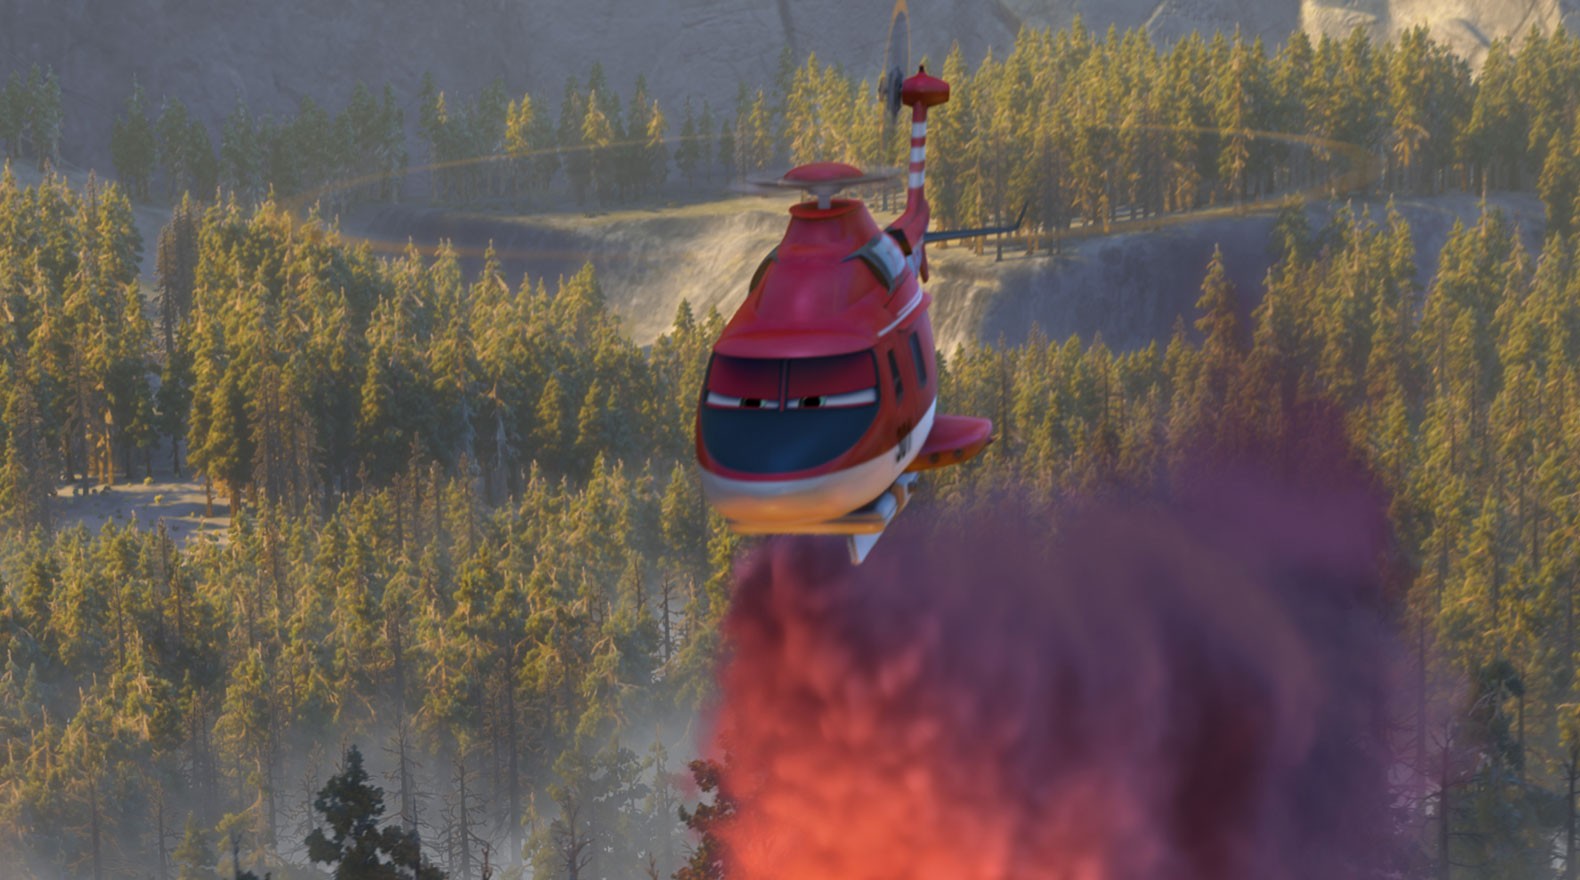 Blade Ranger from Walt Disney Pictures' Planes: Fire & Rescue (2014)